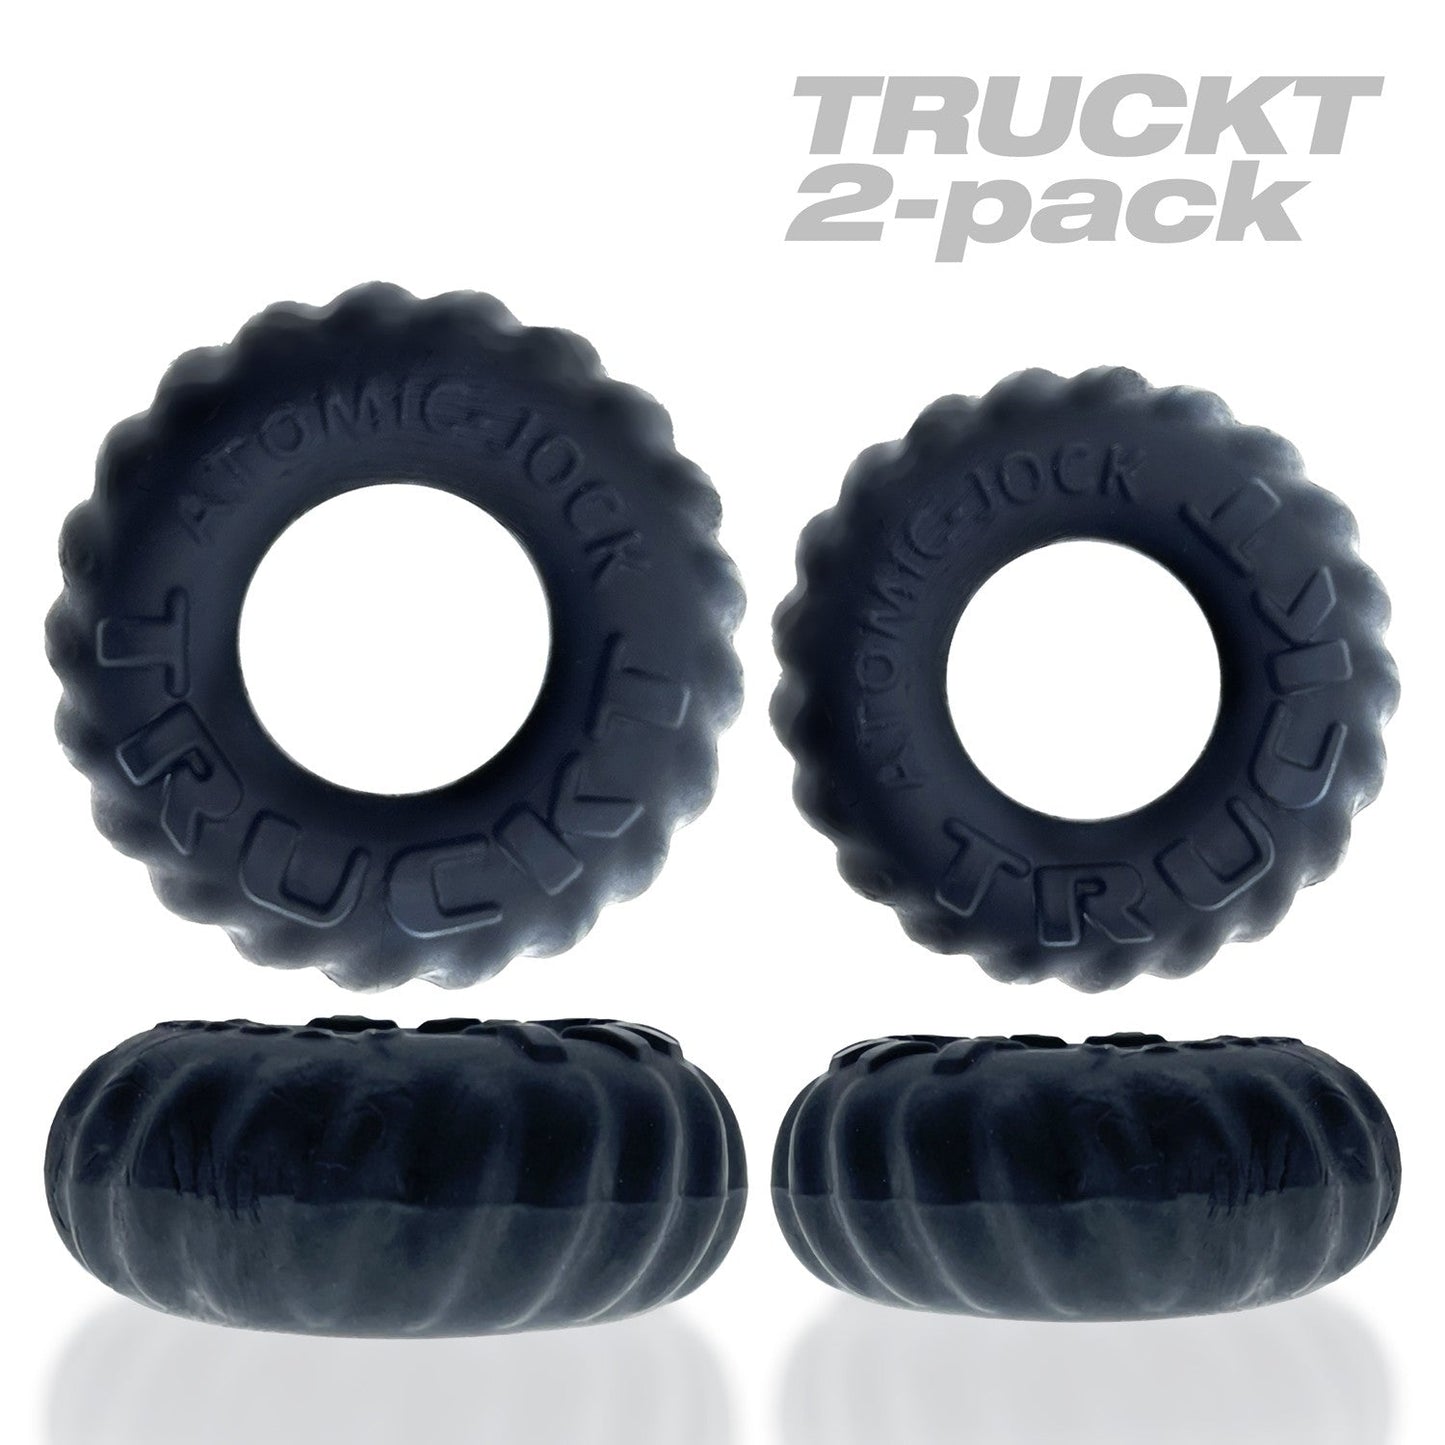 TRUCKT, 2-piece cockring - PLUS+SILICONE special edition - NIGHT